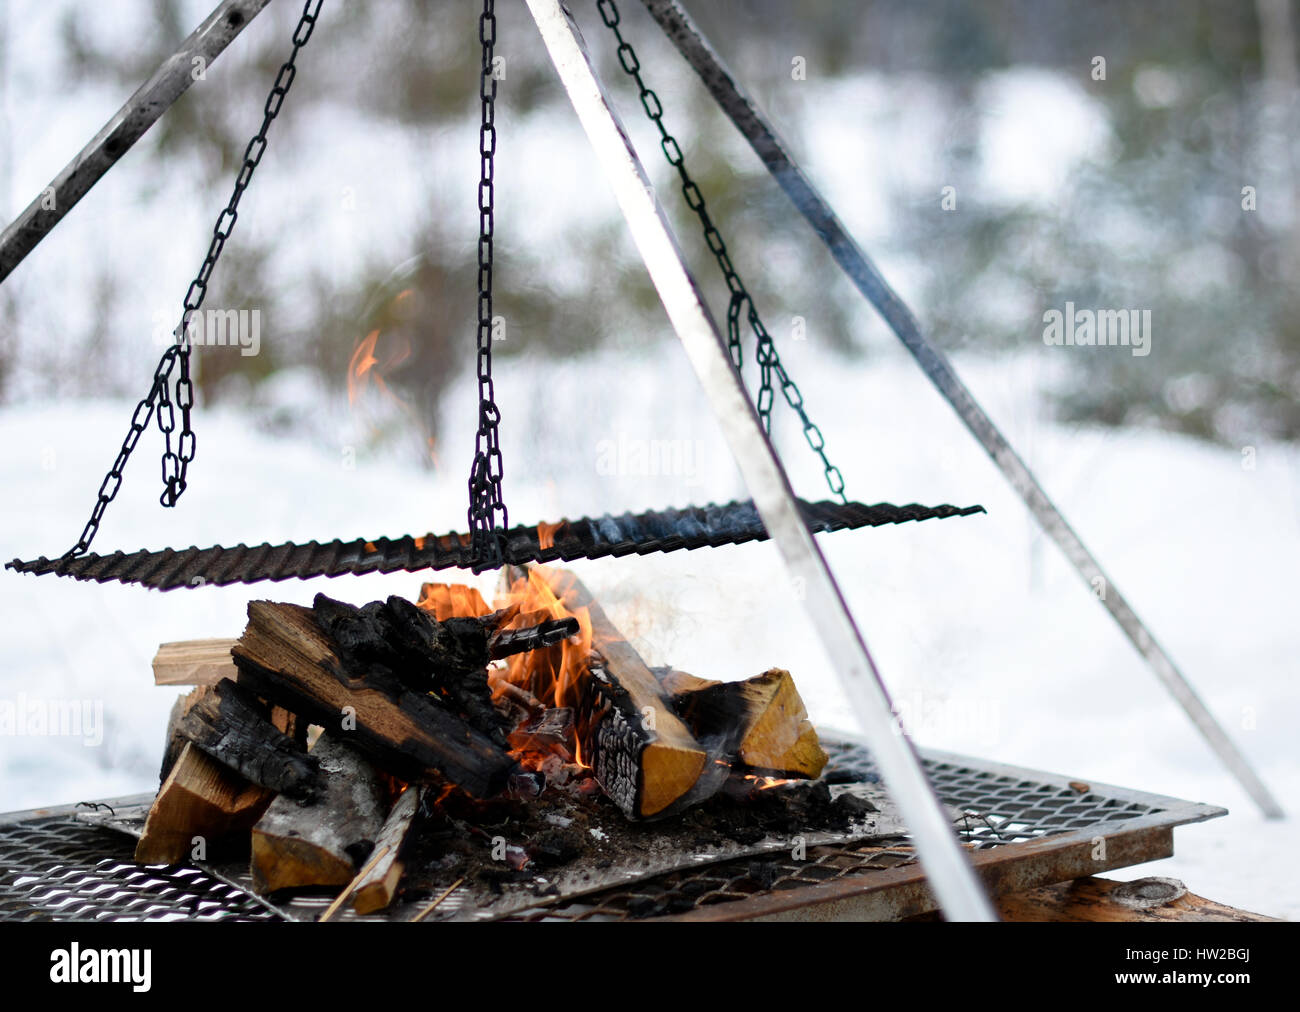 Closup of a construction for cooking in nature in winter on a burning fire, picture from the North of Sweden. Stock Photo